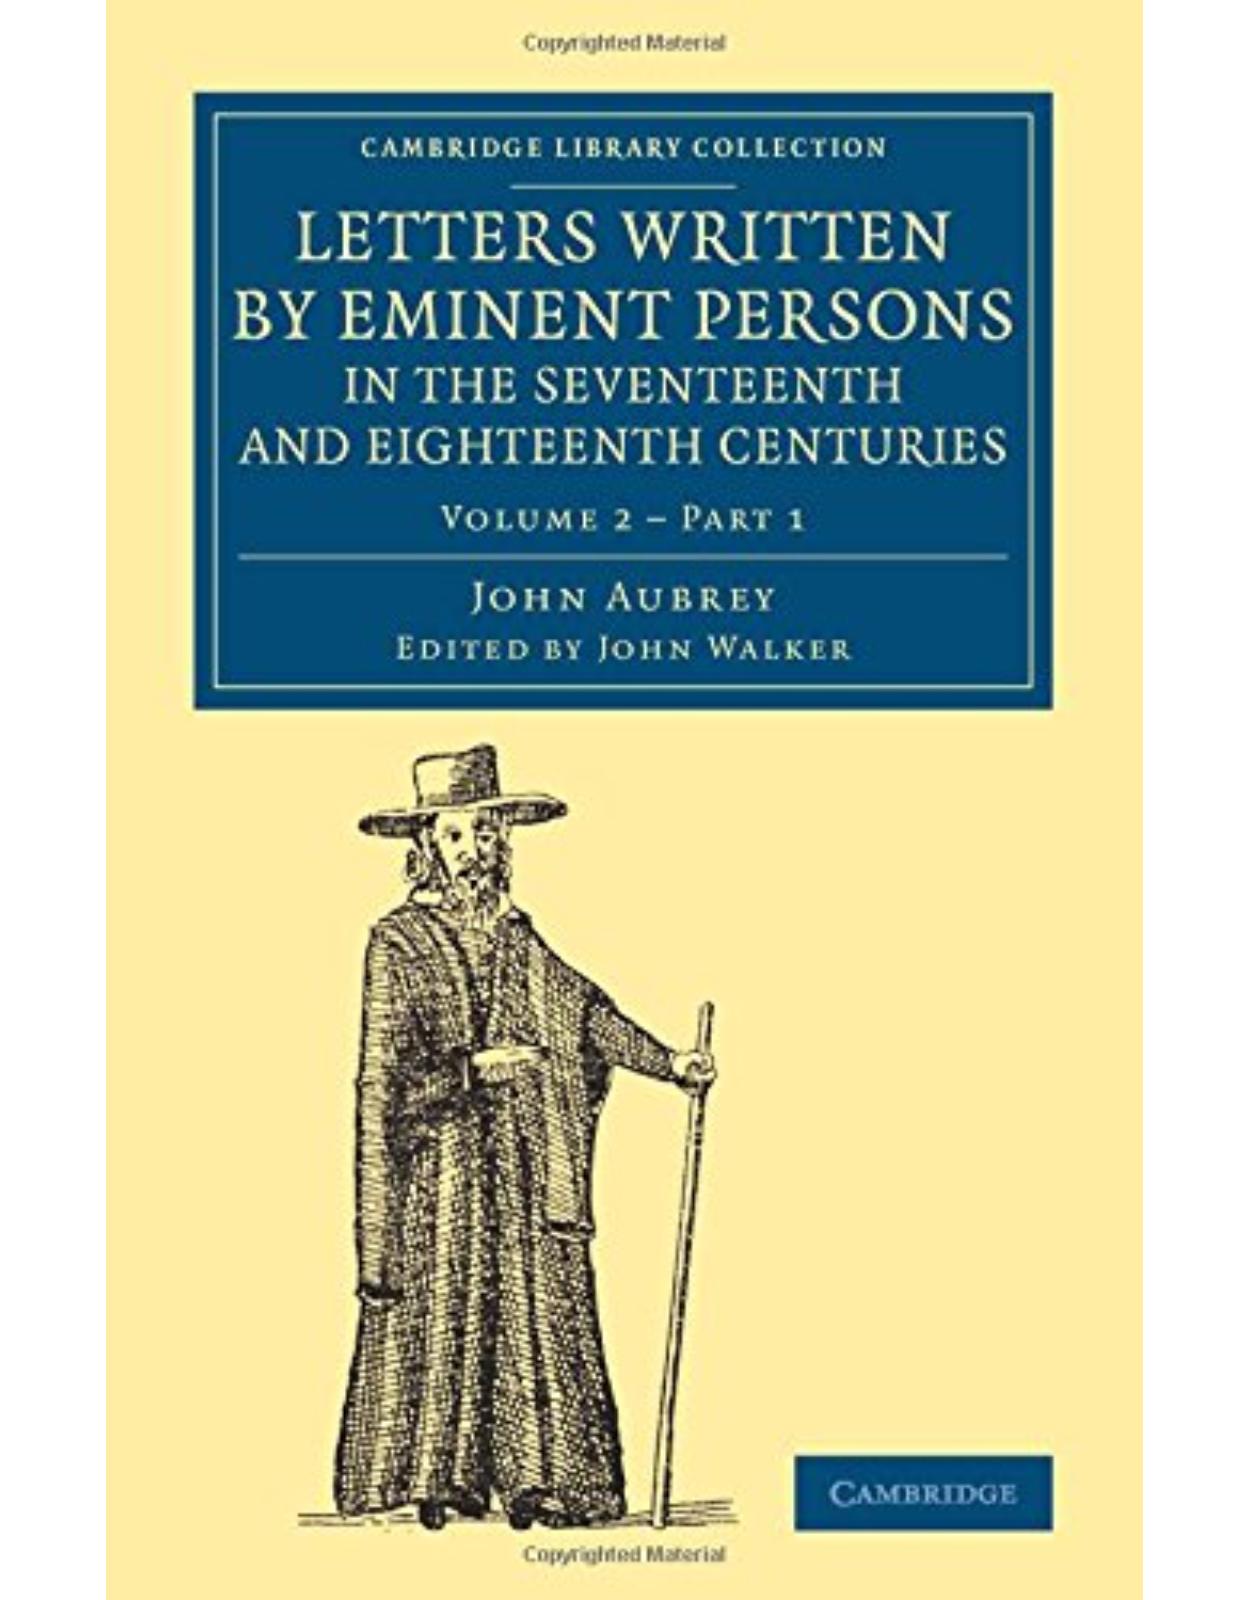 Letters Written by Eminent Persons in the Seventeenth and Eighteenth Centuries 2 Volume Set: Letters Written by Eminent Persons in the Seventeenth and ... - British and Irish History, General